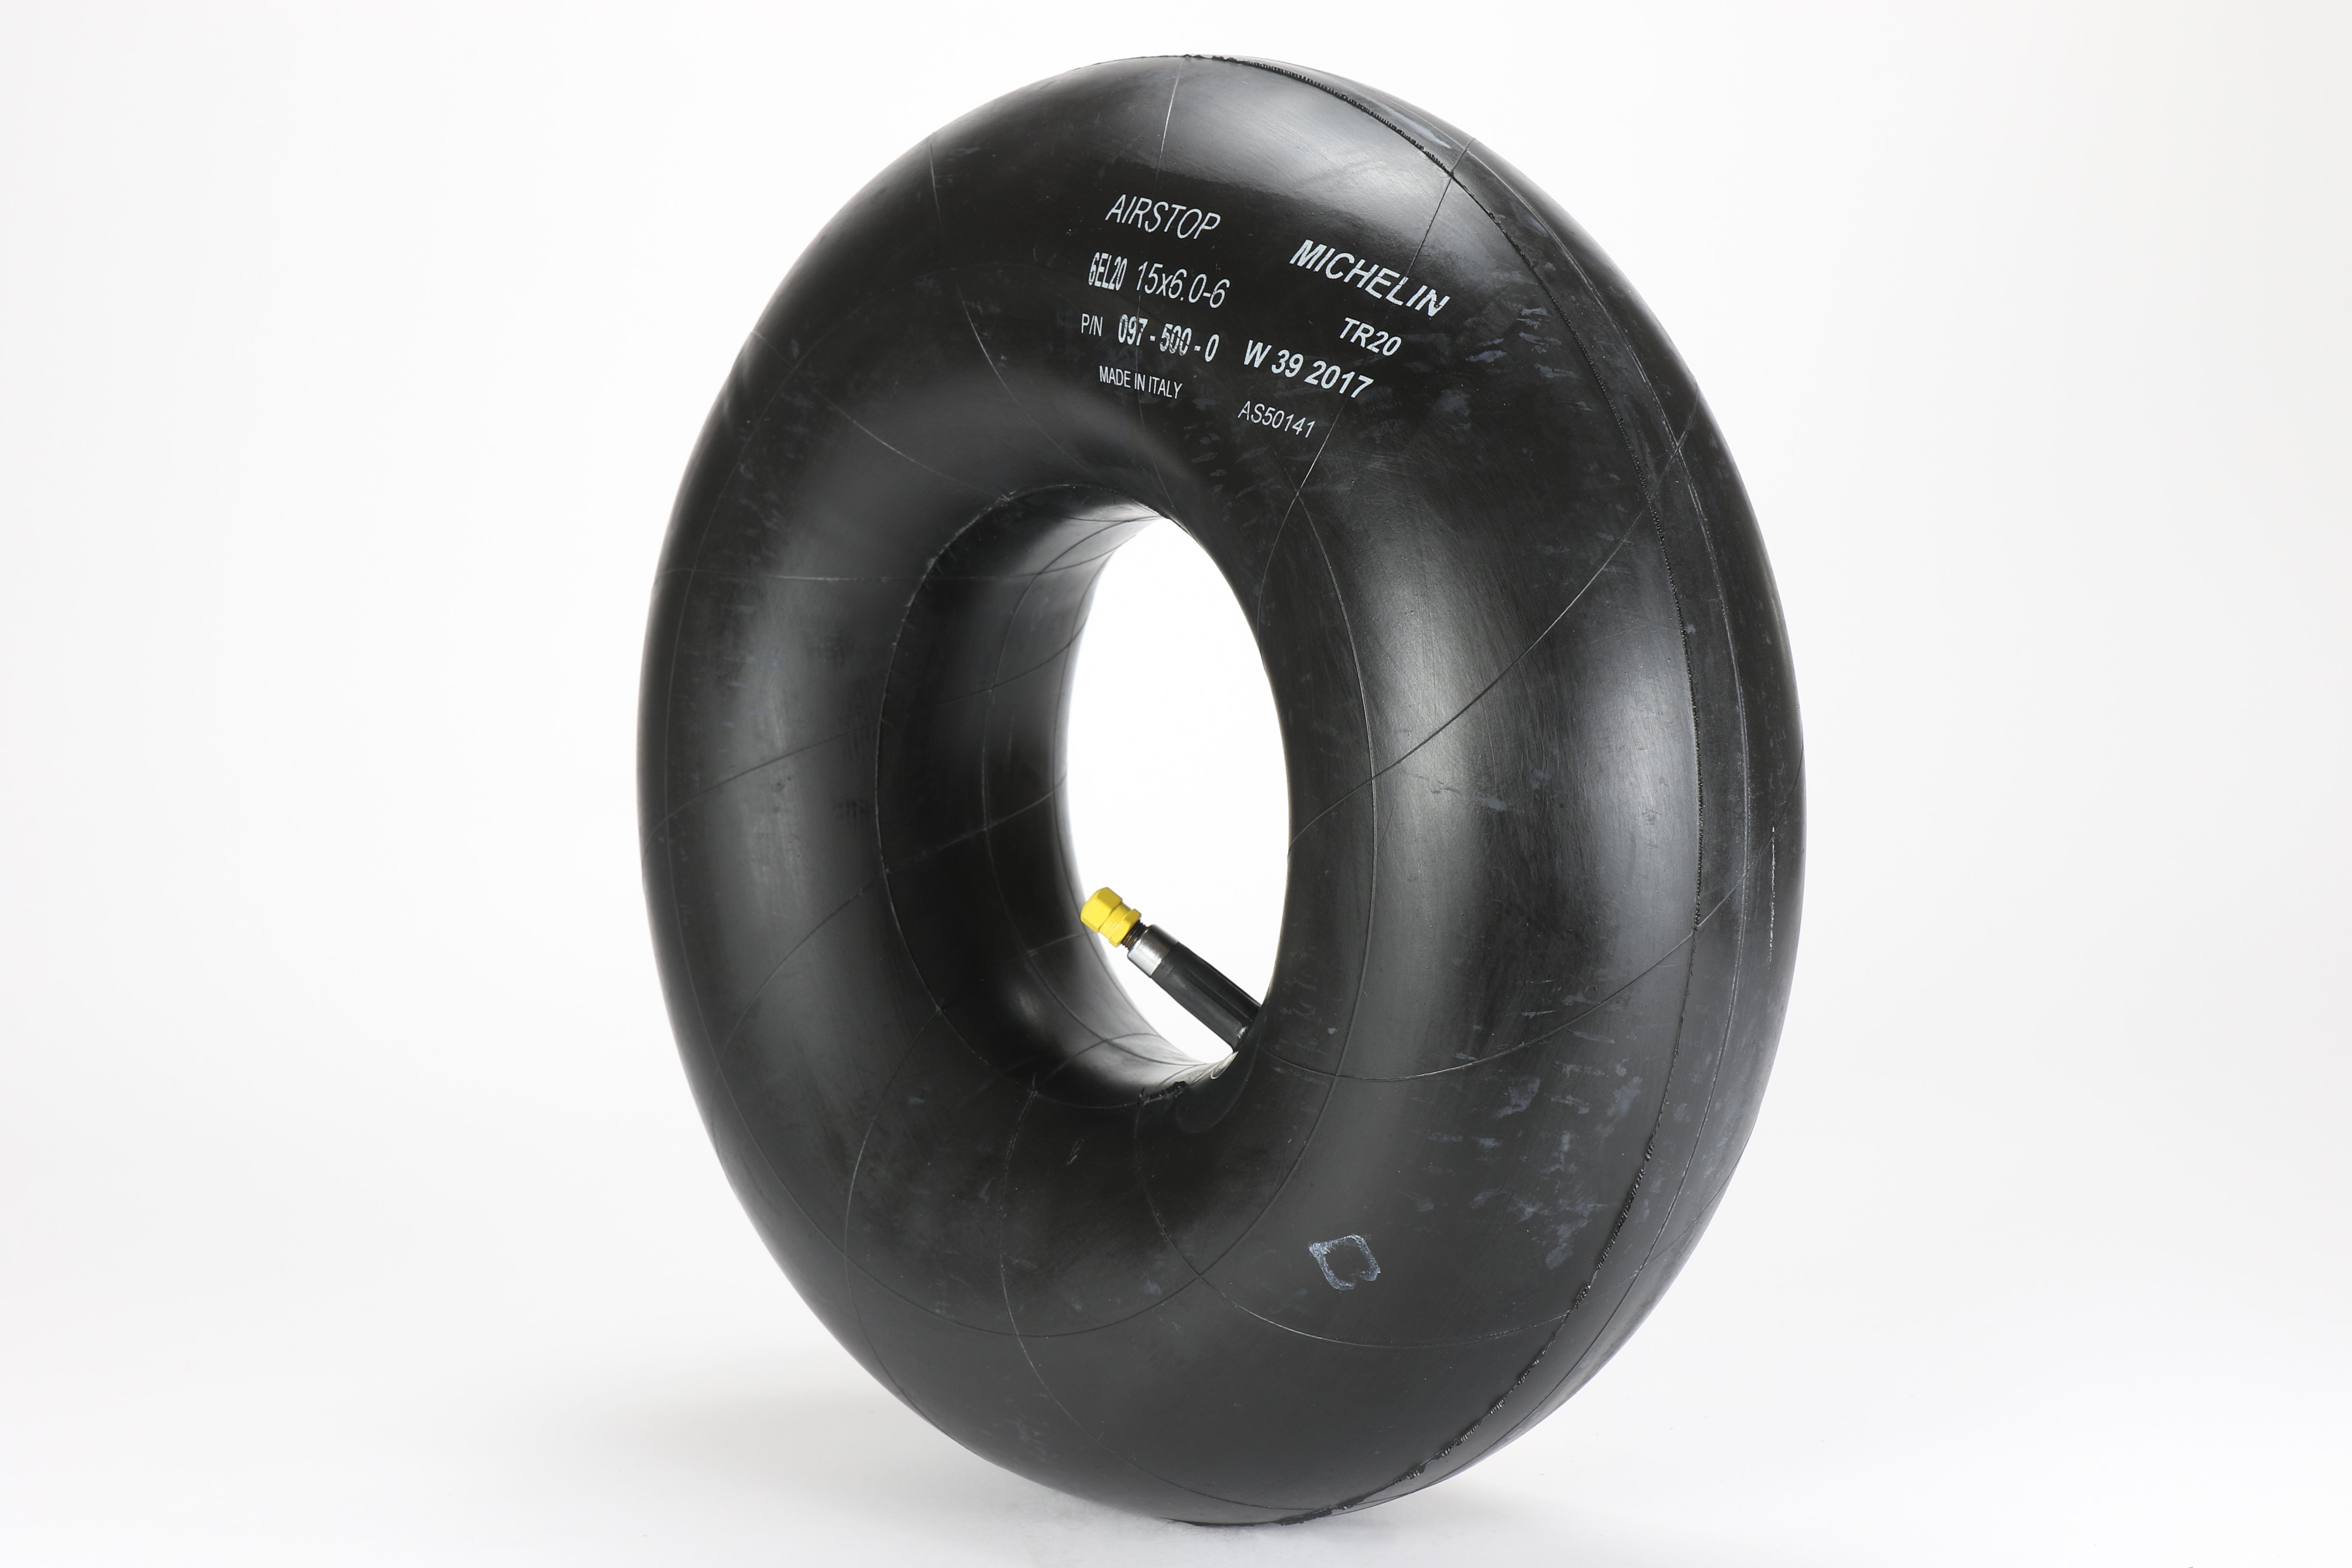 Wheels :: Tyres & Tubes :: Tubes :: 19 inch Inner Tubes :: Michelin  Reinforced Airstop Motorcycle Inner Tube 325 x 19, 350 x 19, 400 x 19, 410  x 19, 90/100-19, 100/90-19, 110/90-19, 110/80-19, 120/60-19, 130/70-19